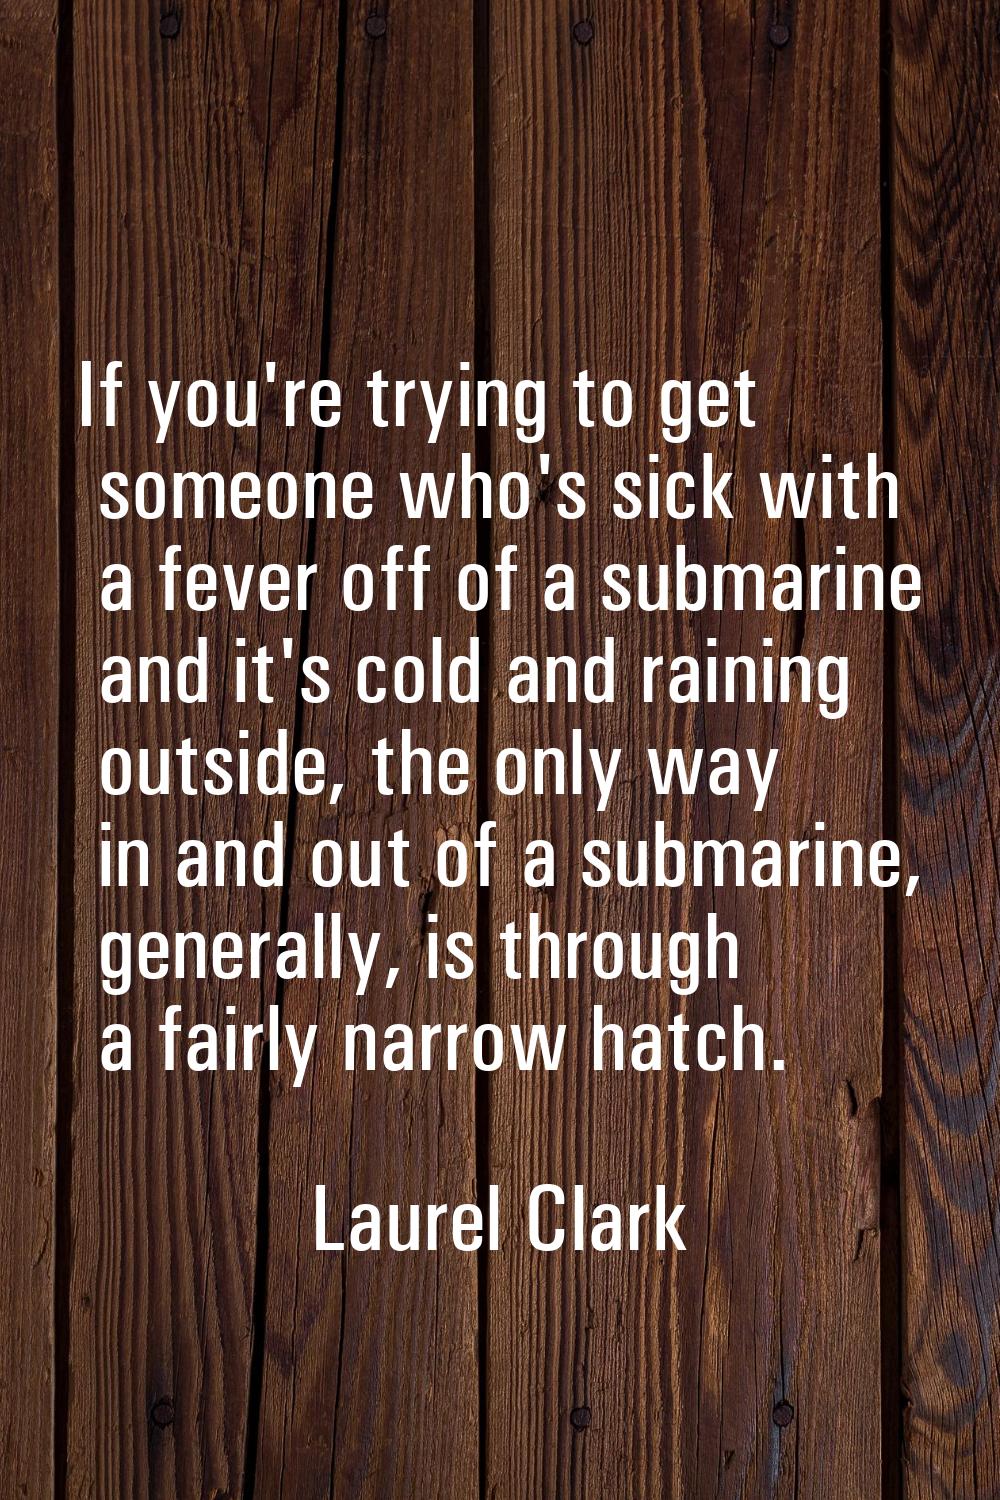 If you're trying to get someone who's sick with a fever off of a submarine and it's cold and rainin